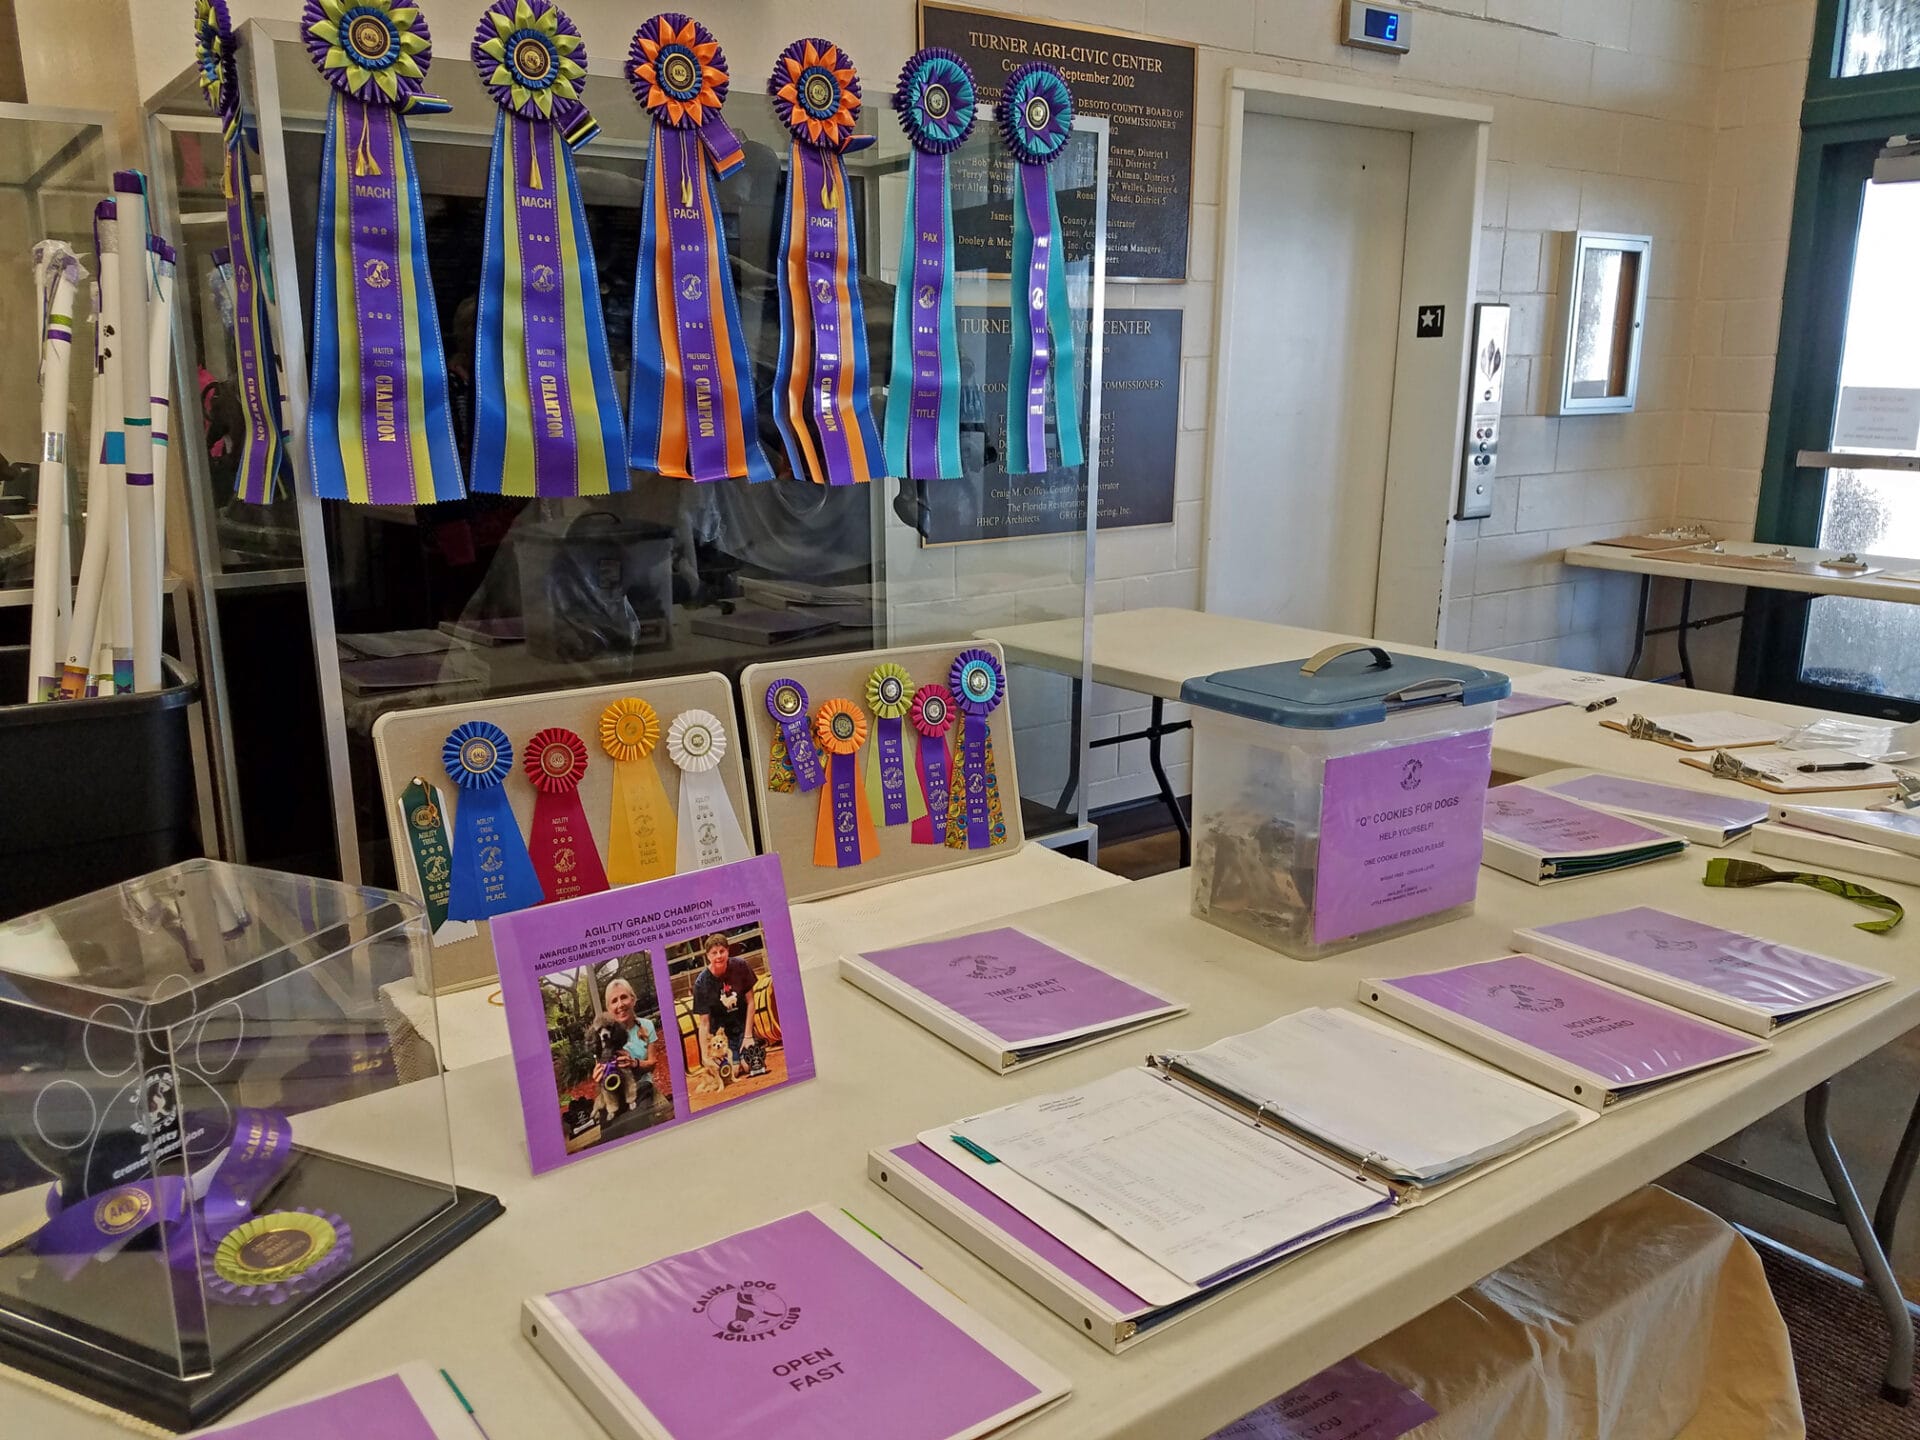 Agility score table with notebooks and ribbons beneath score monitor at Turner Agri-Civic Center, Arcadia FL